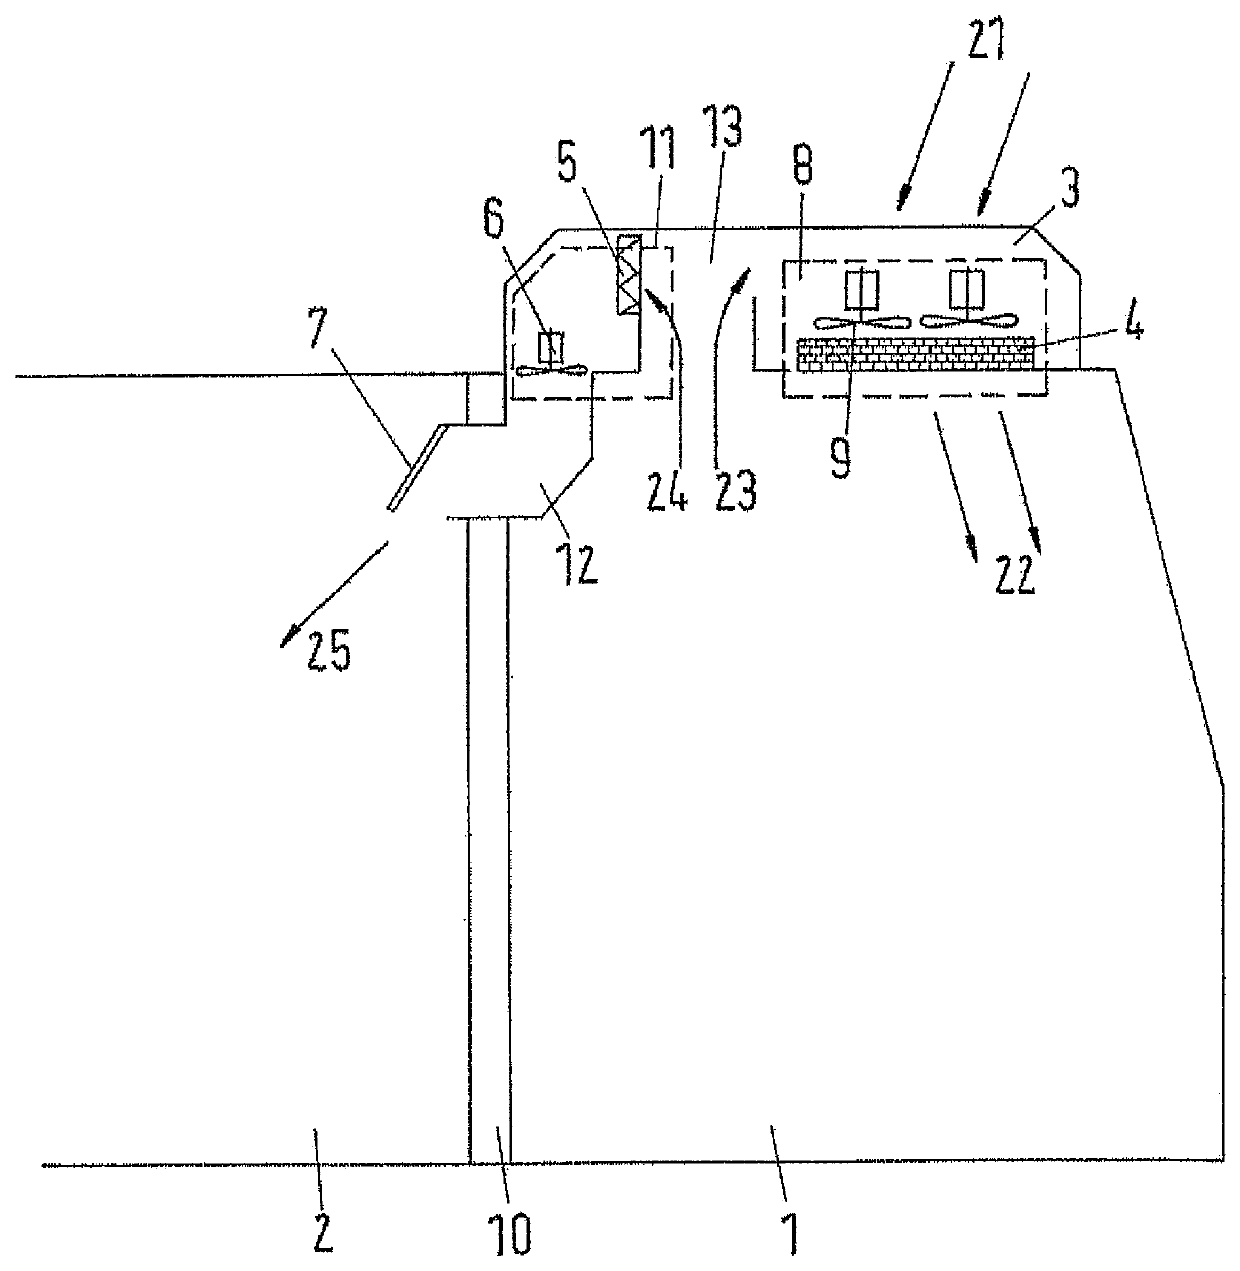 Rail vehicle comprising an engine compartment and at least one driver's cab, and method for generating overpressure in the engine compartment